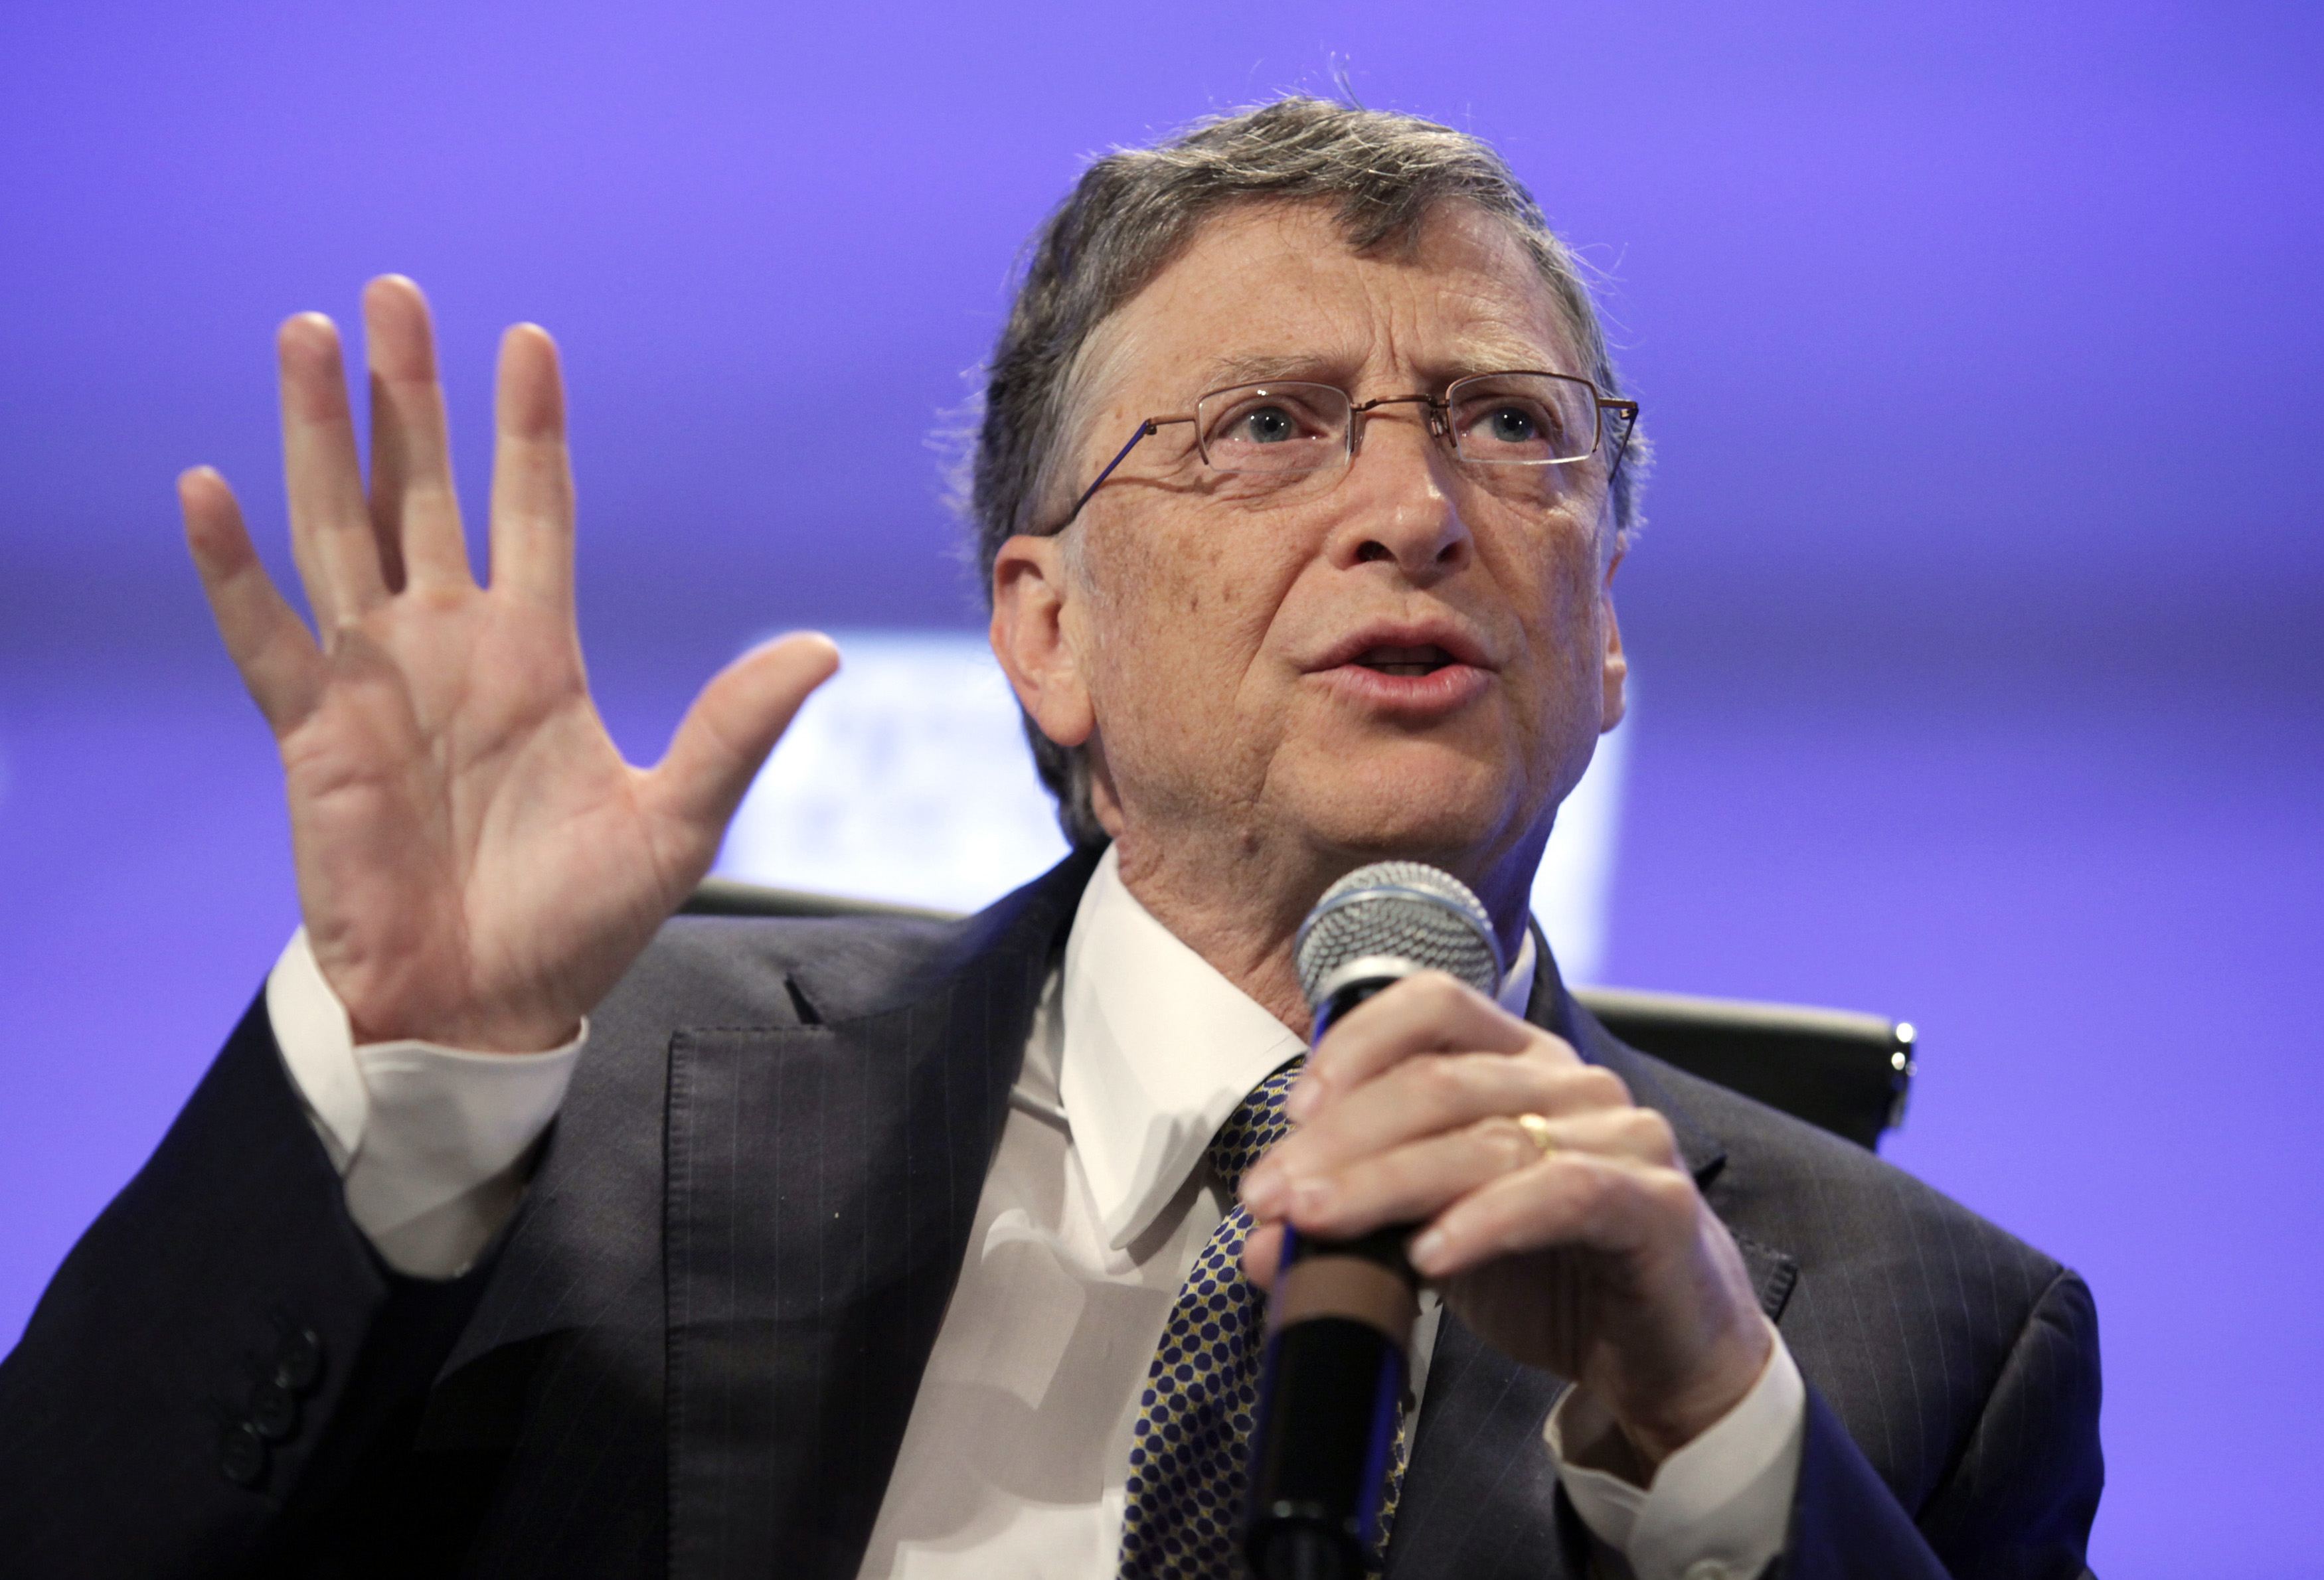 File photo of Bill Gates speaking at Peterson Institute 2013 Fiscal Summit on Facing the Future in Washington